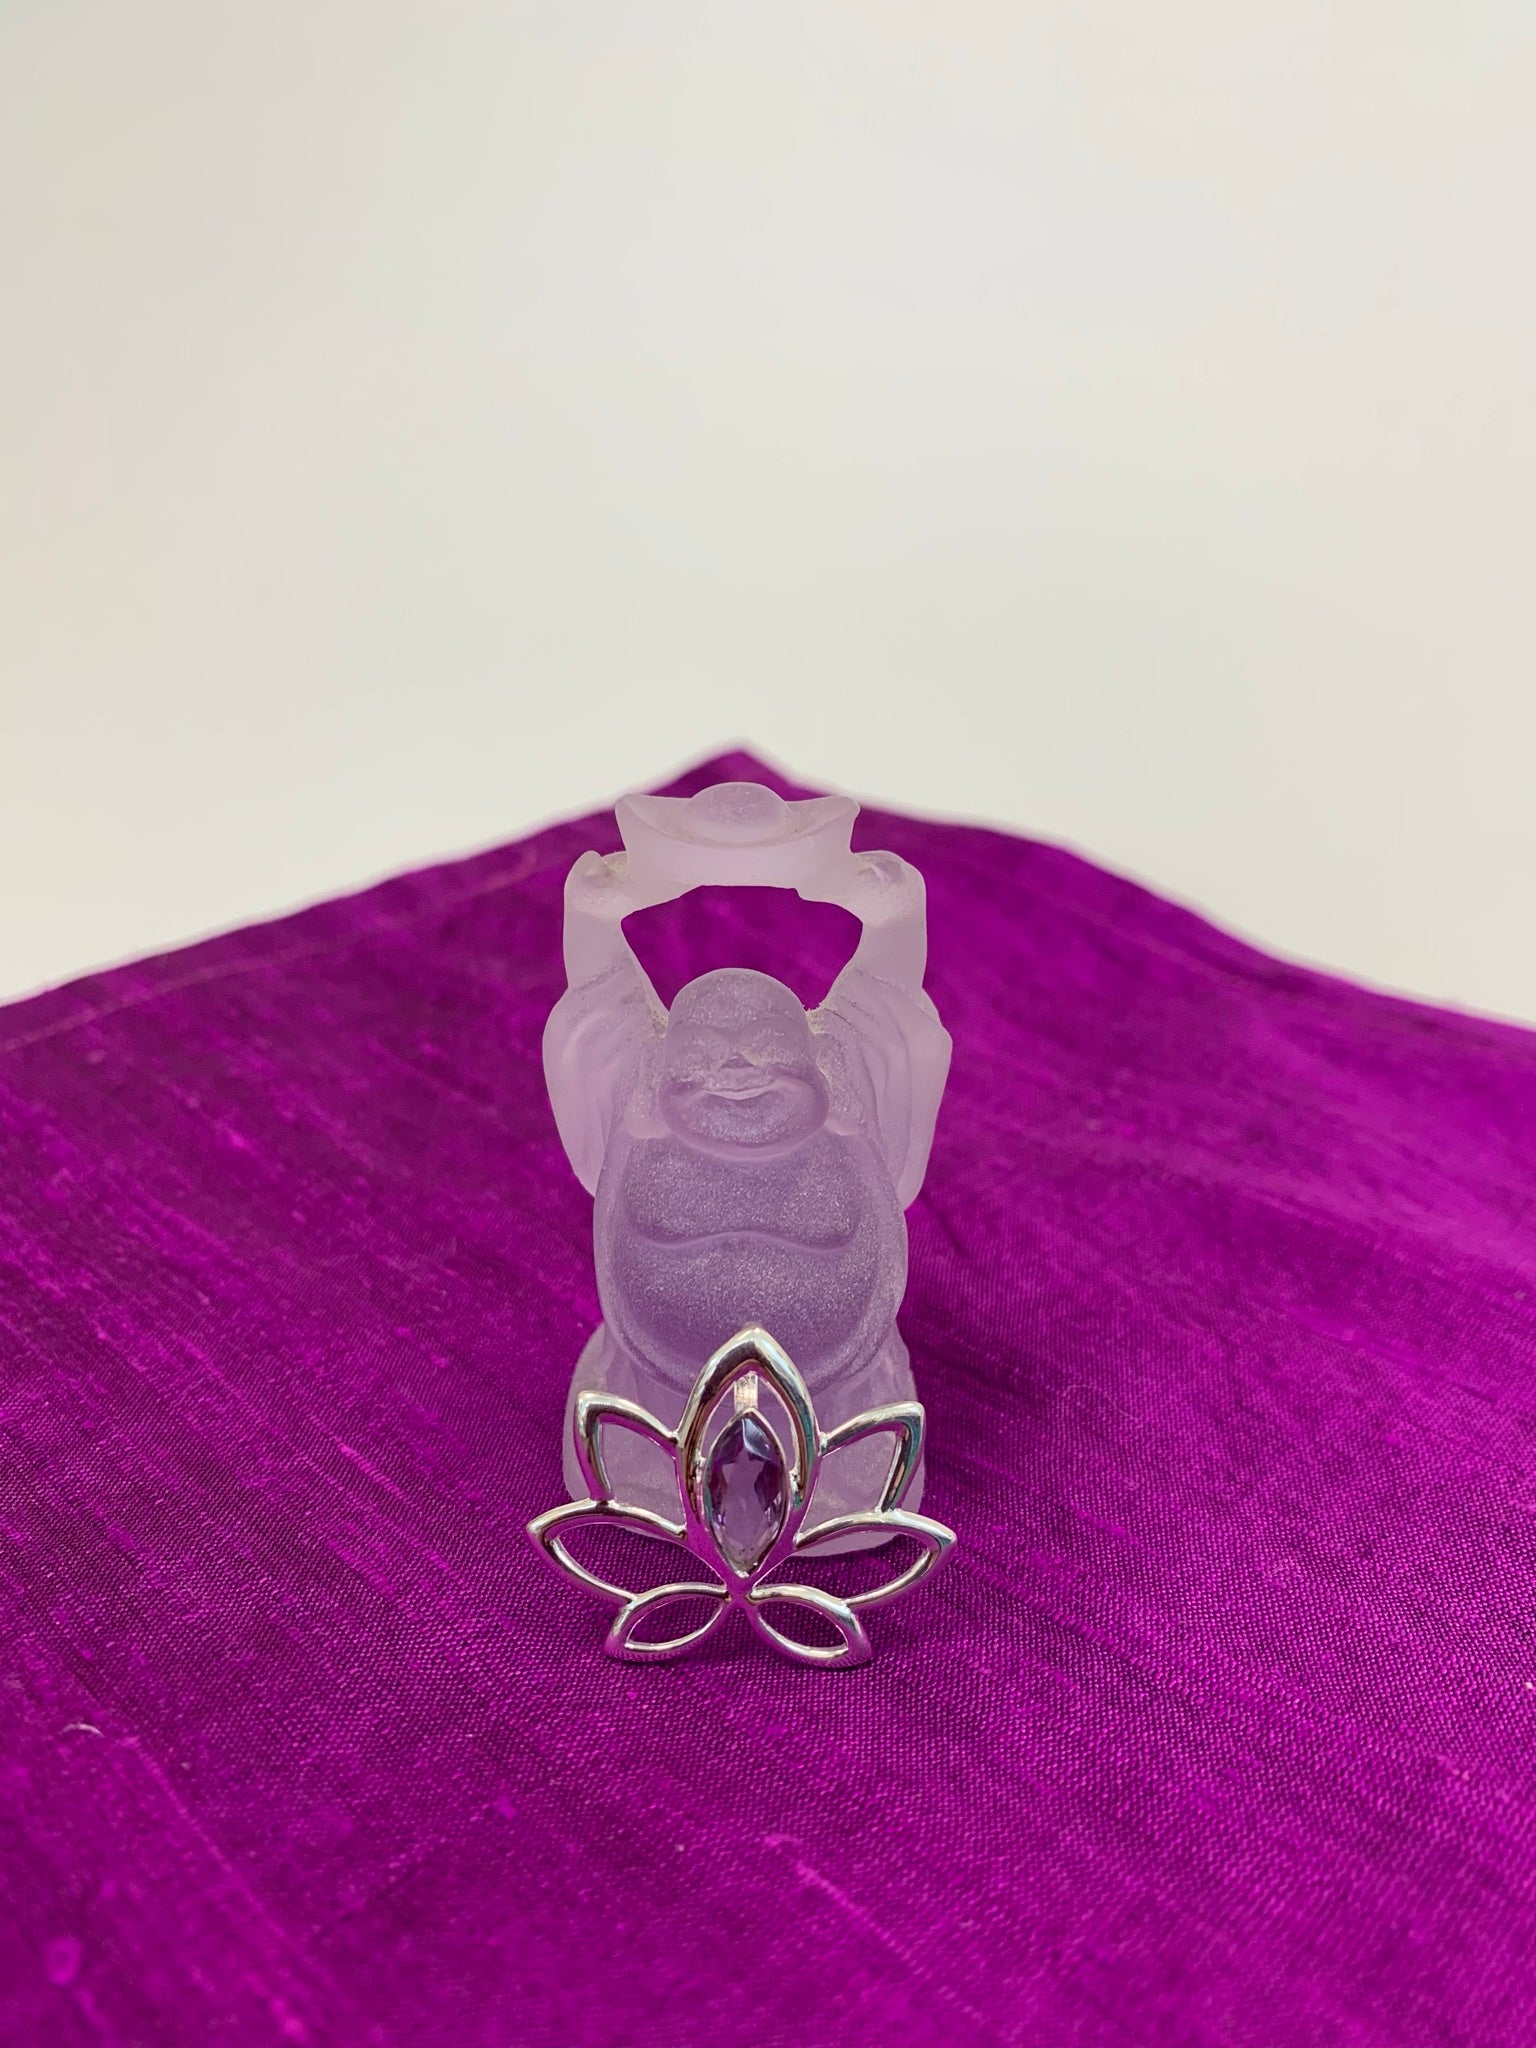 Marquise shaped amethyst set at the top of an open sterling silver lotus.  Pendant only, no necklace chain.  This lovely pendant is lightweight and approximately 1" long.  